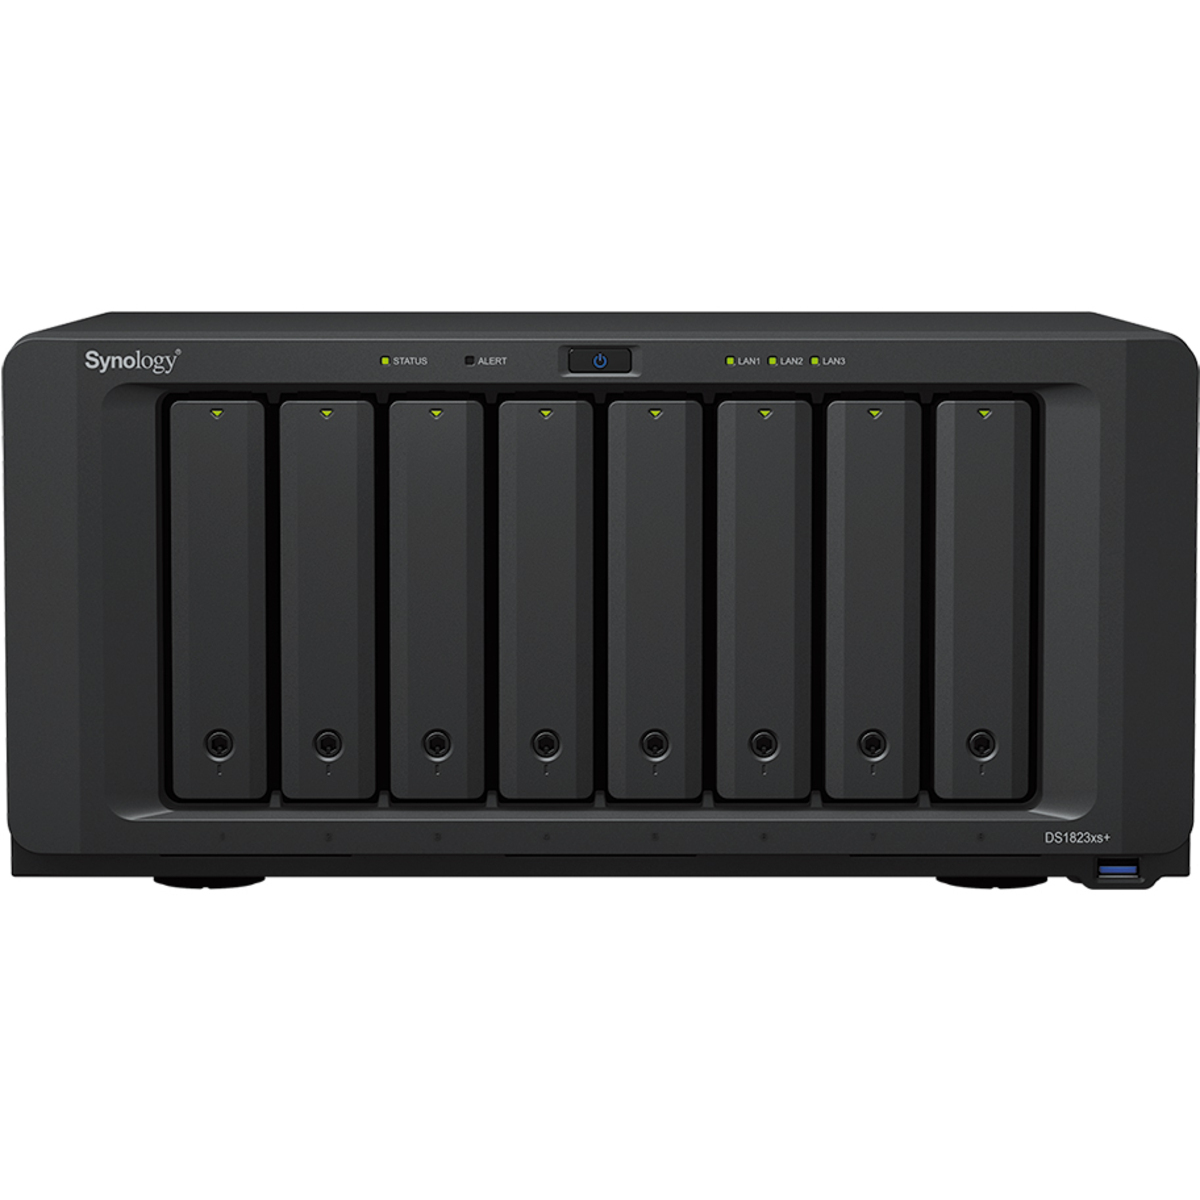 Synology DiskStation DS1823xs+ 10tb 8-Bay Desktop Multimedia / Power User / Business NAS - Network Attached Storage Device 5x2tb Seagate IronWolf Pro ST2000NT001 3.5 7200rpm SATA 6Gb/s HDD NAS Class Drives Installed - Burn-In Tested DiskStation DS1823xs+